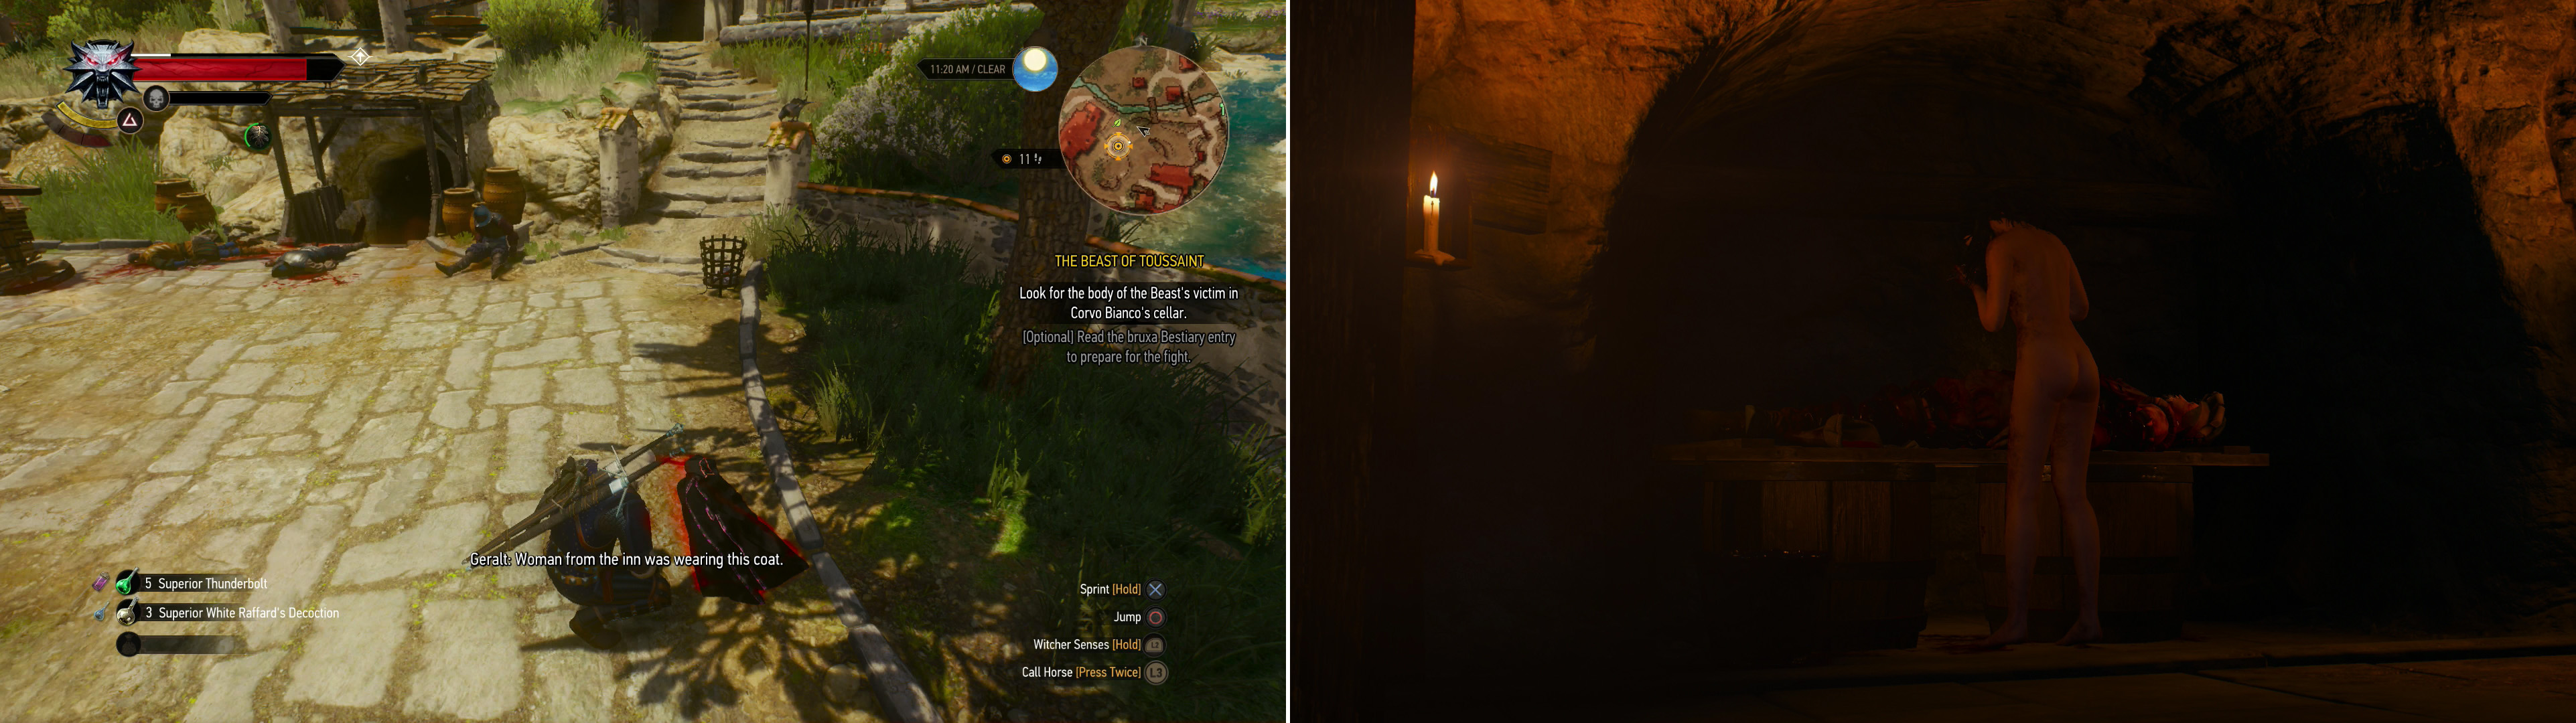 Search the clues around Corvo Bianco (left) and follow them into the cellar, where you'll find the corpse from the river… and the other being searching for it (right).